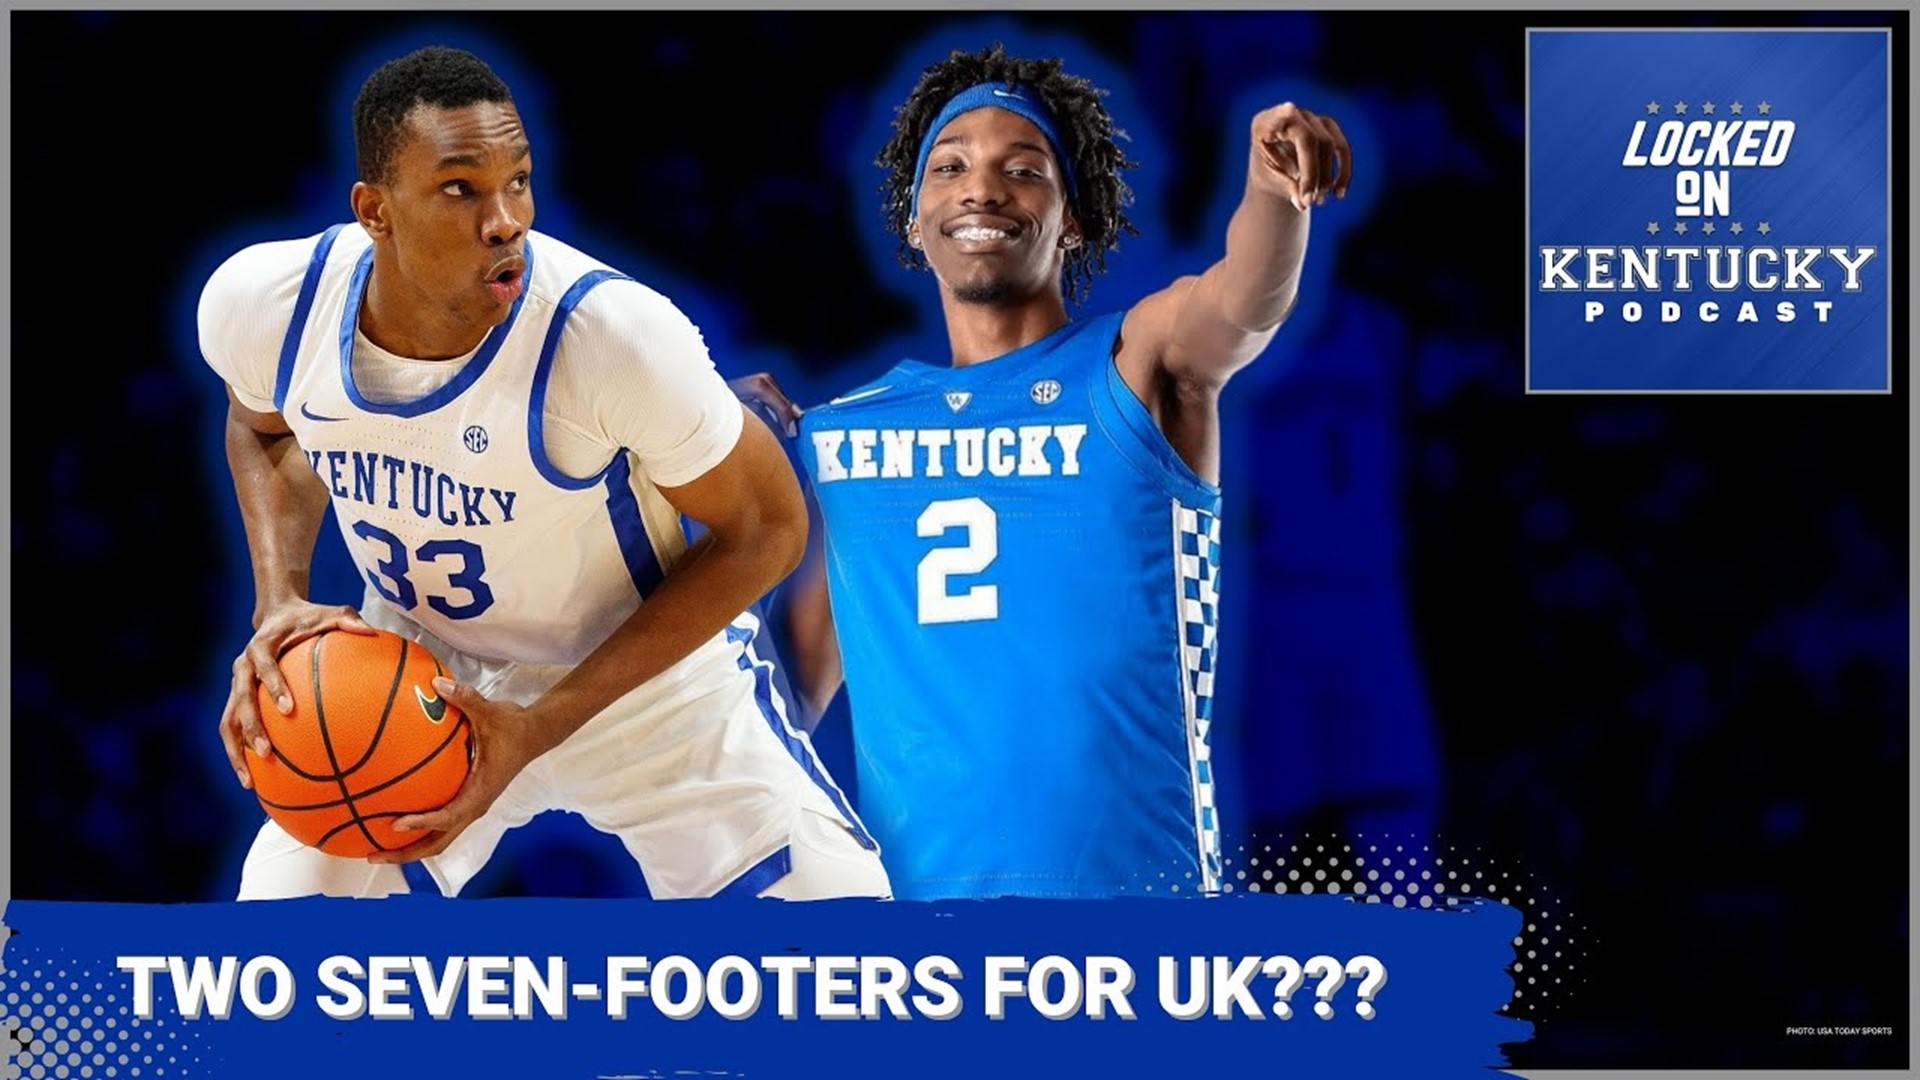 Kentucky basketball's John Calipari has made some recent comments about potentially playing Ugonna Onyenso and Aaron Bradshaw TOGETHER in a dual seven-footer lineup.